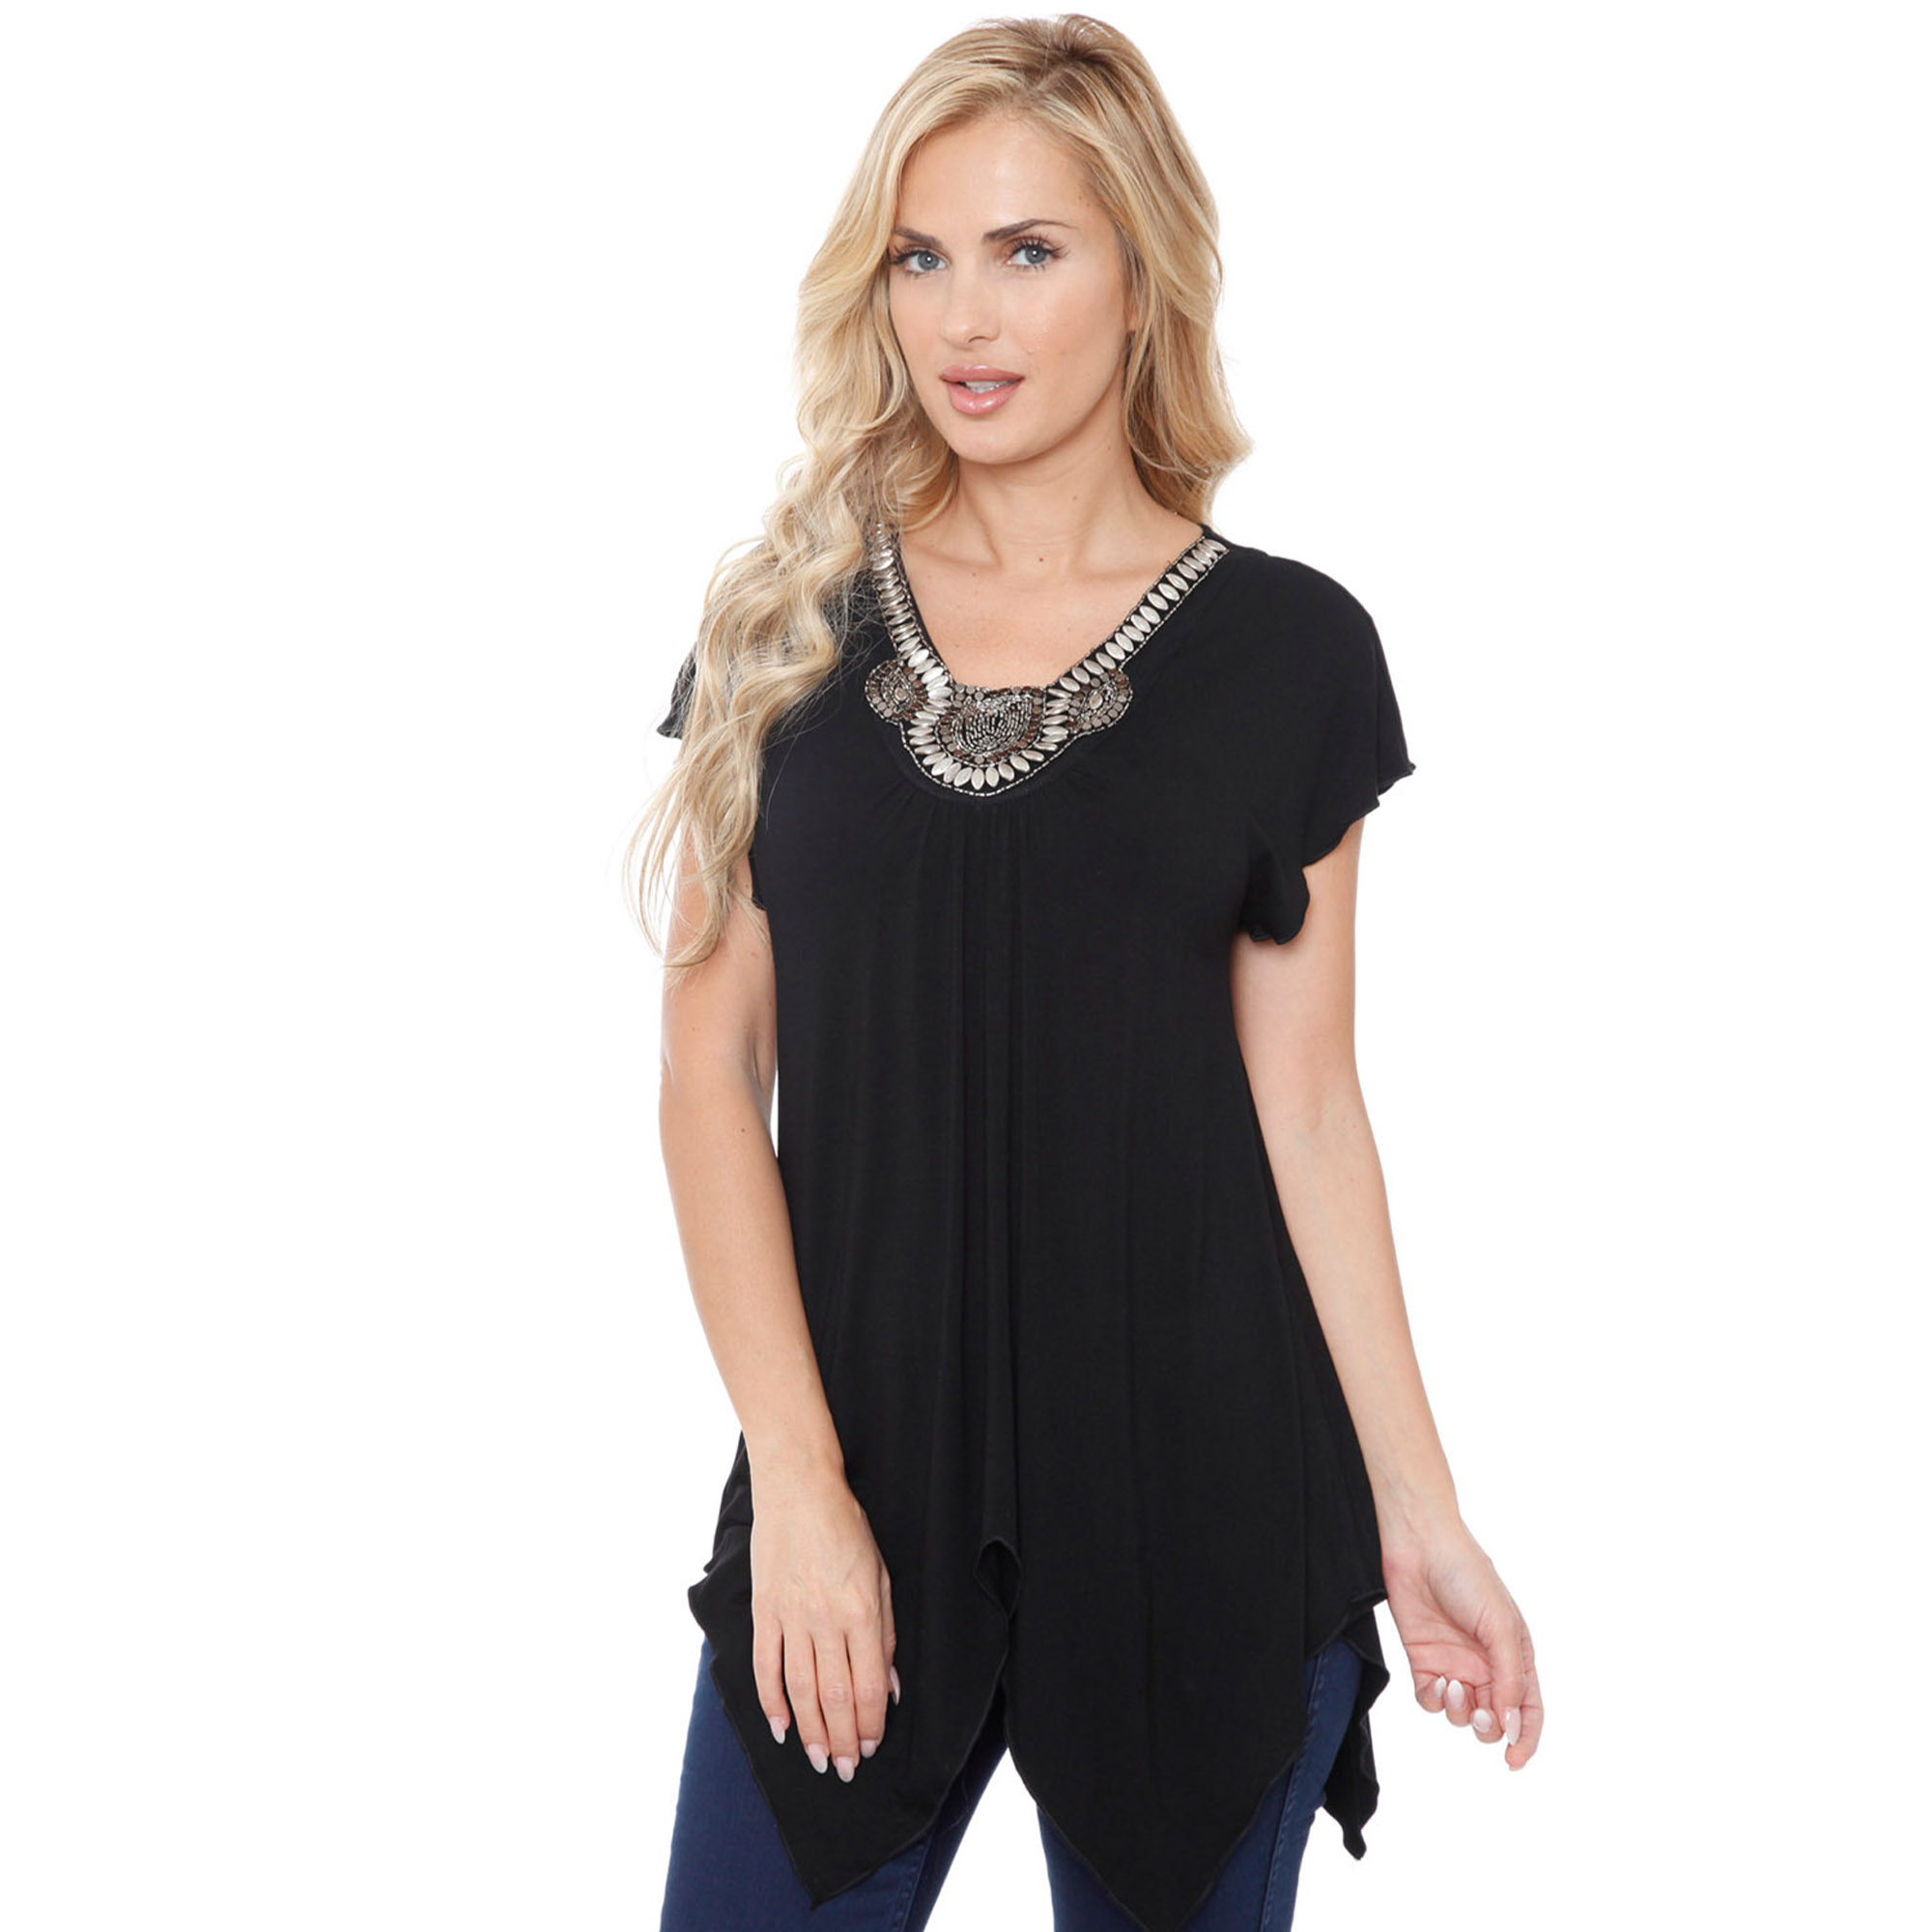 White Mark Women's Embellished Tunic Top - Black, Small